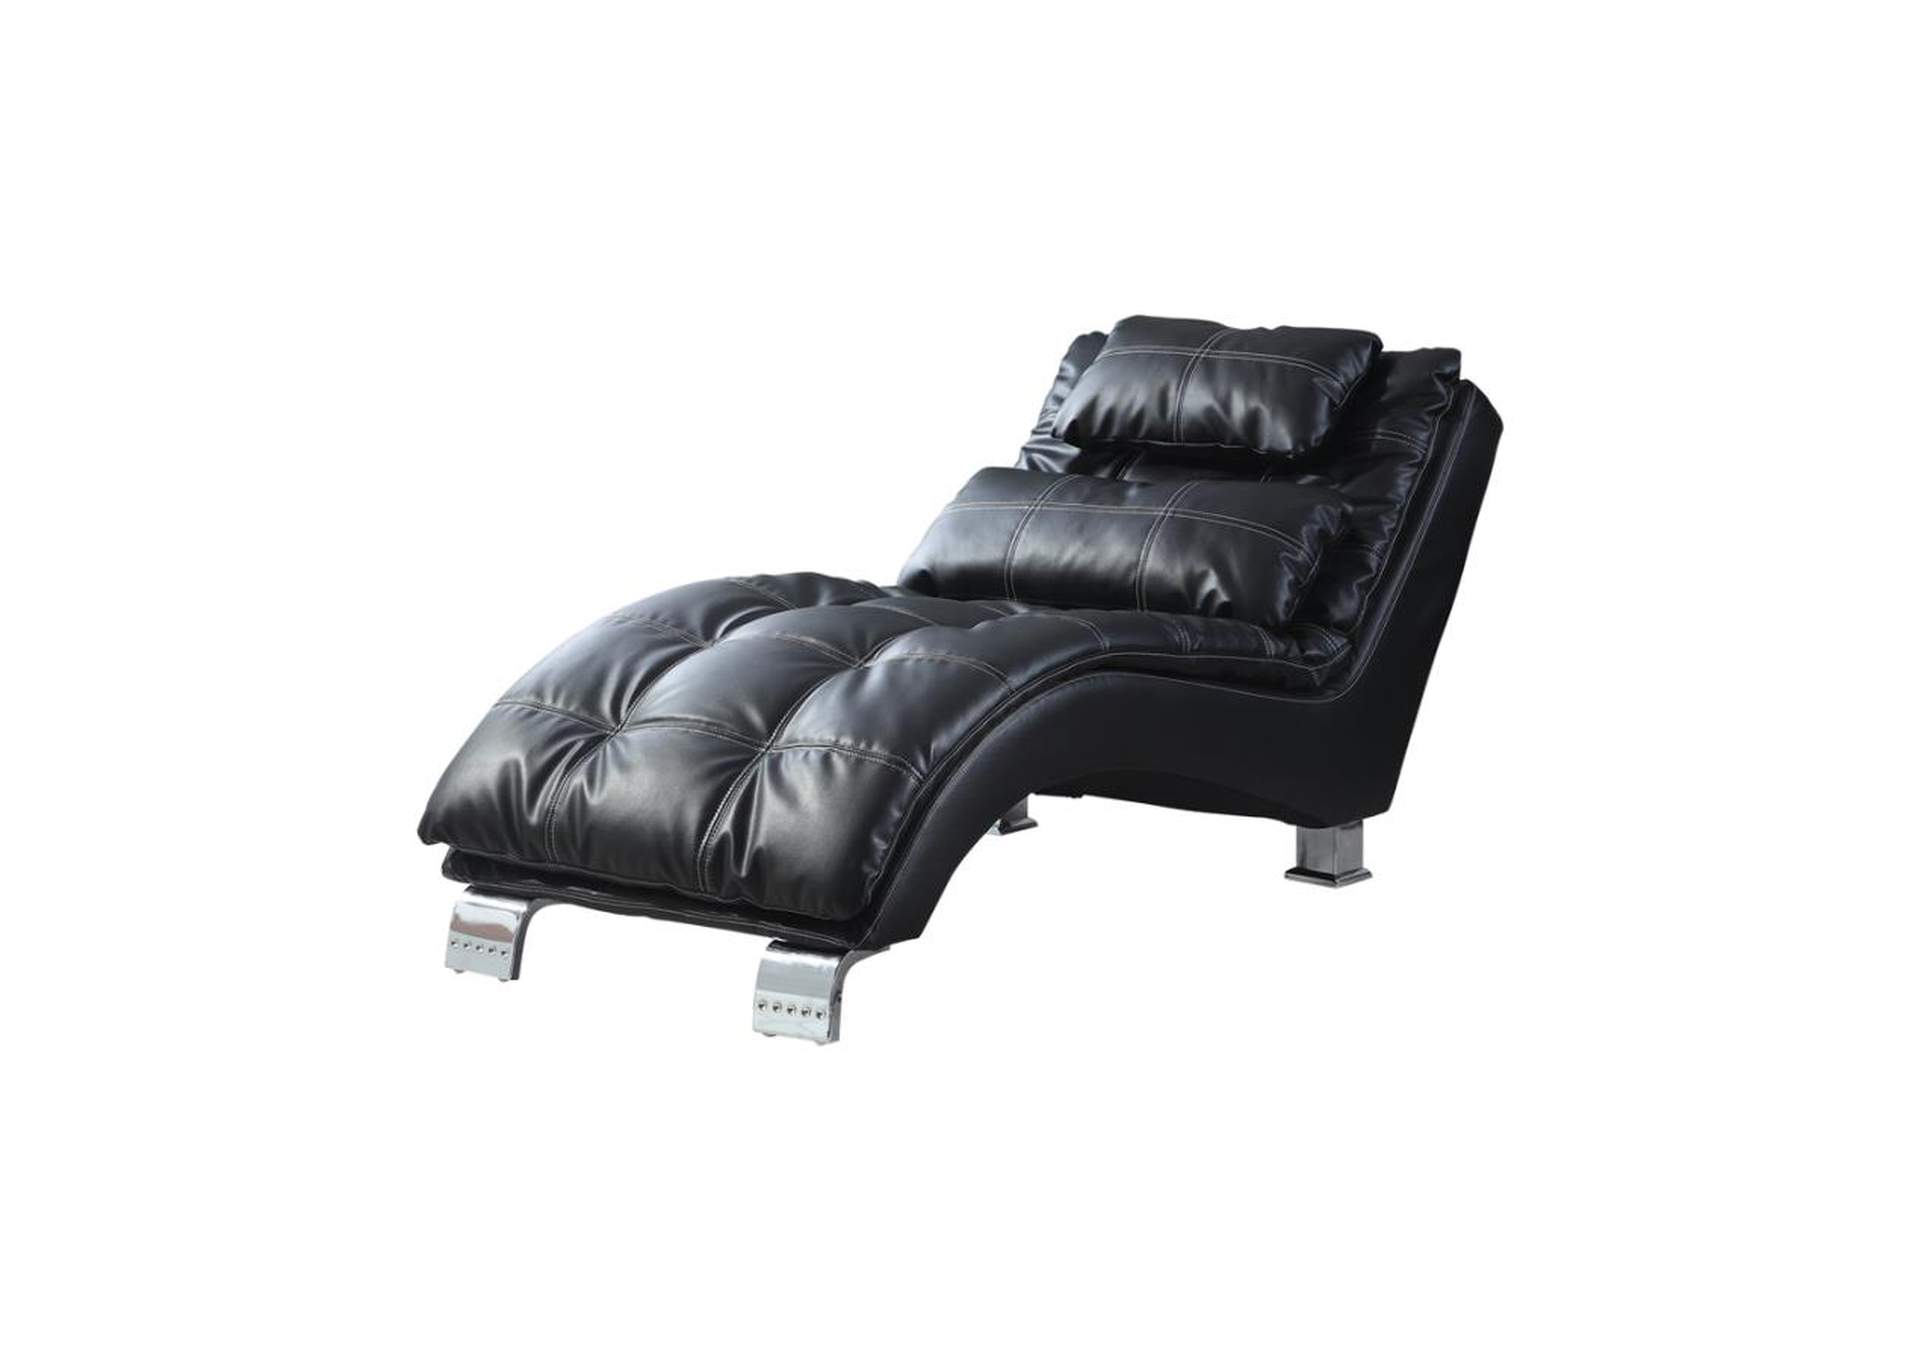 Dilleston Upholstered Chaise Black,Coaster Furniture